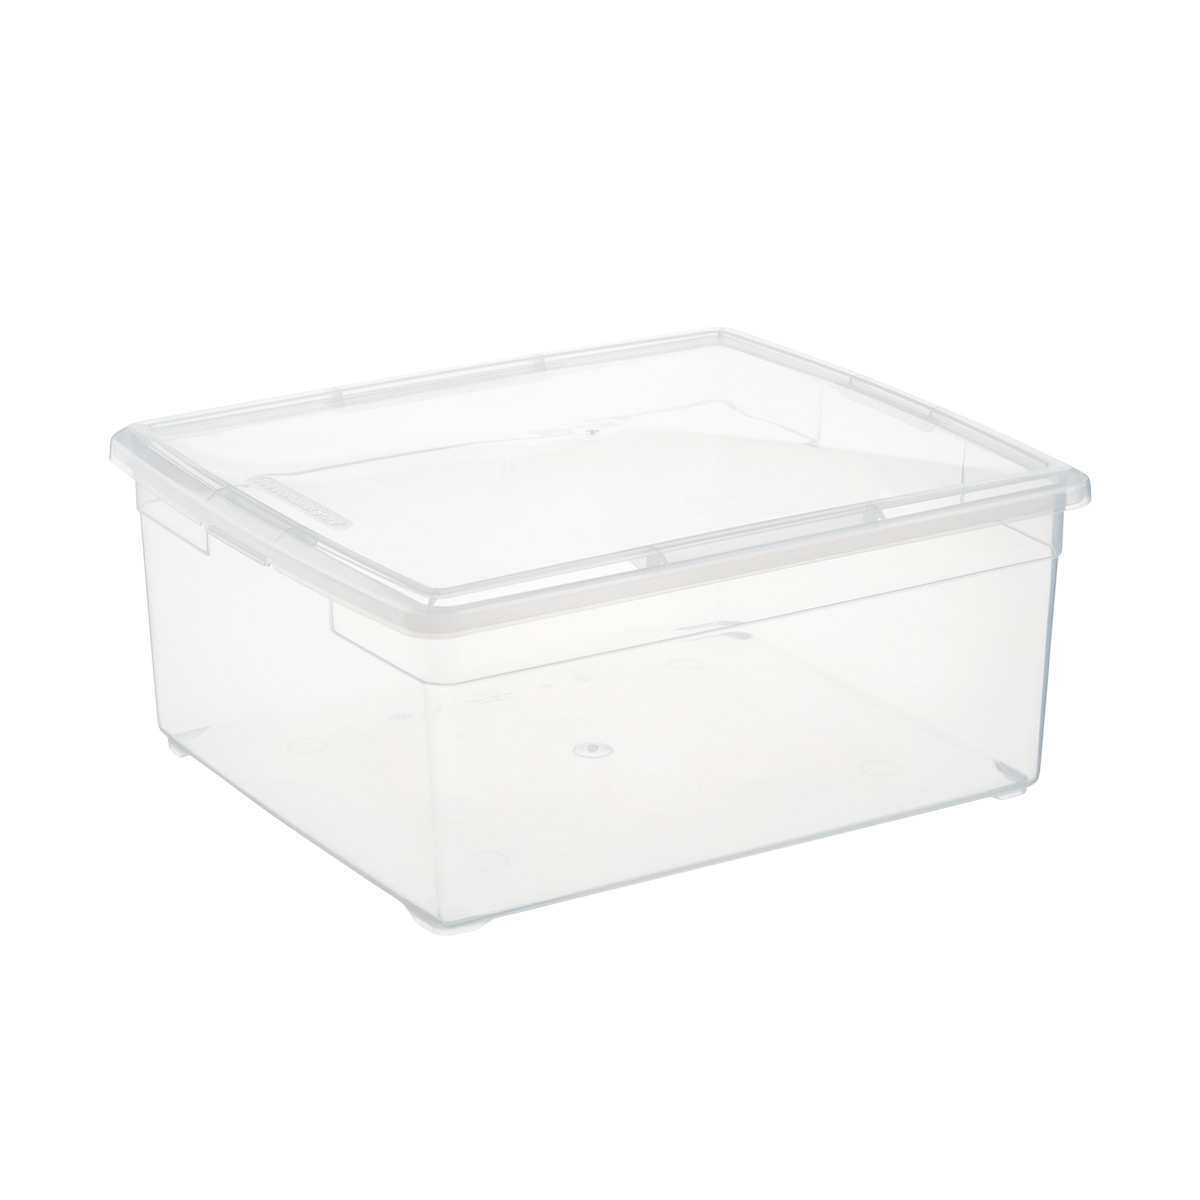 Clear Plastic Storage Bins For Clothes, Clear Storage Boxes For Clothes